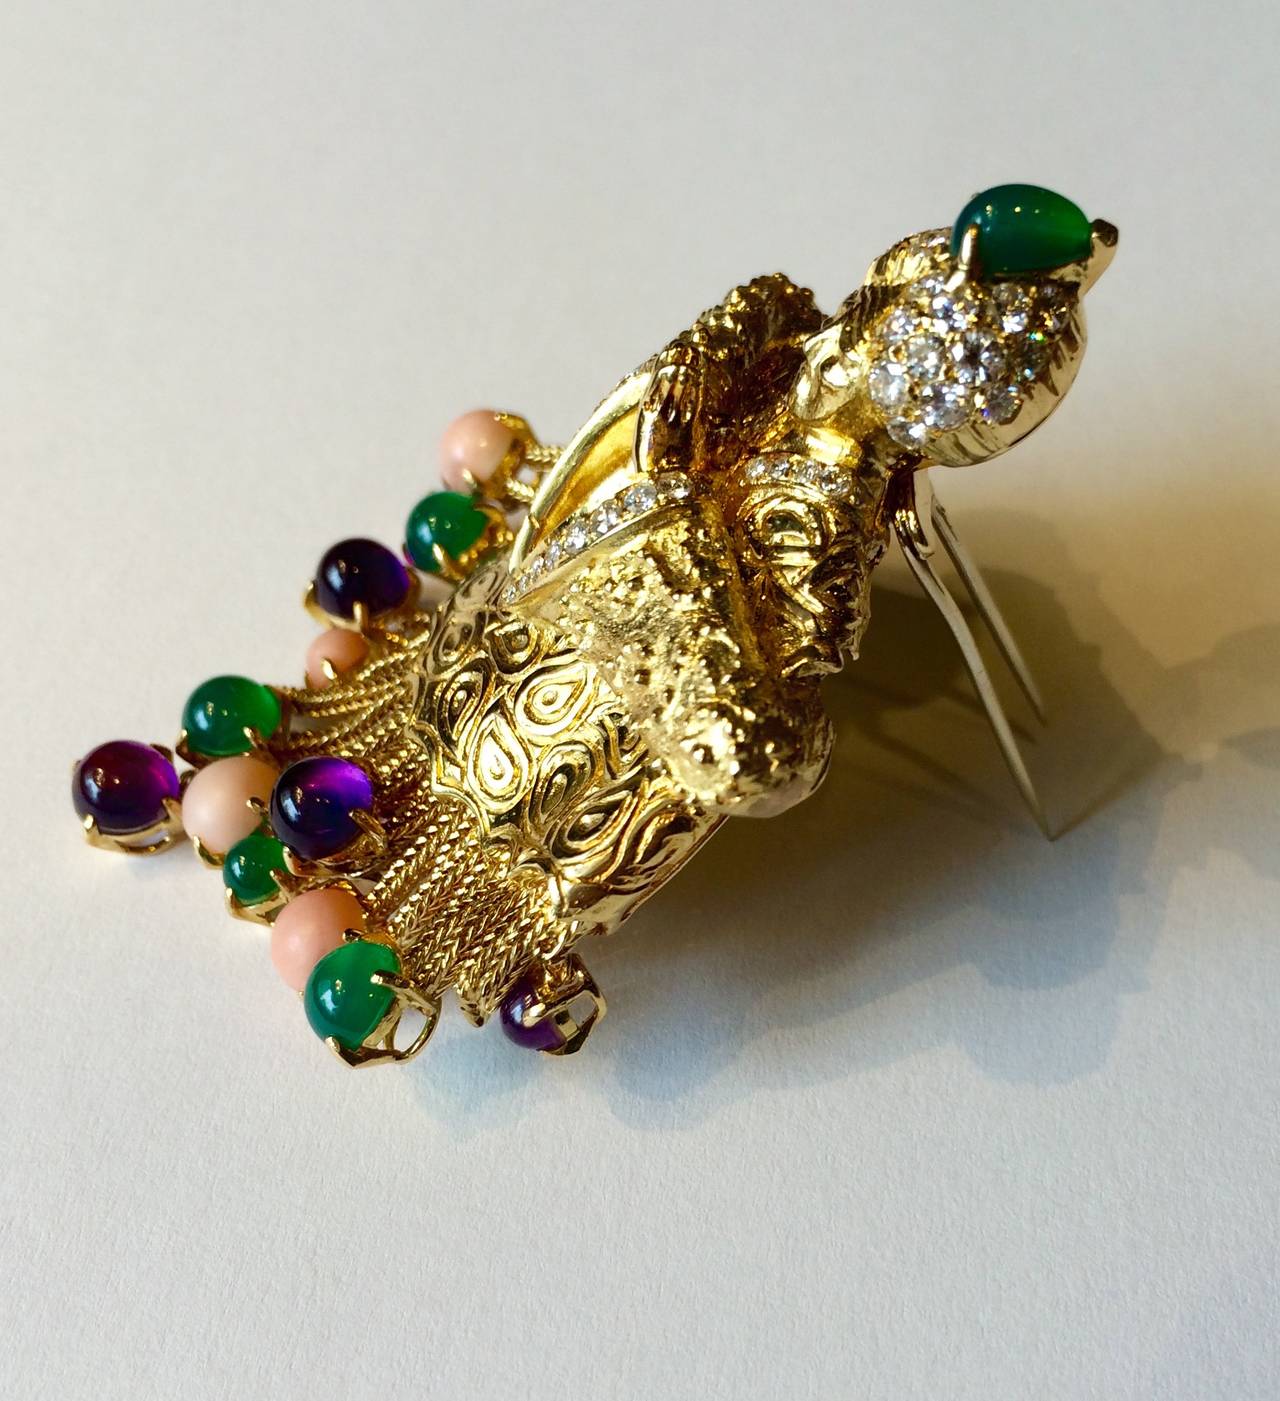 Unique and Ornate 18kt Yellow Gold Estate Brooch Set with Coral, Amethyst, Chalcedony and Diamonds 1.56t.w. / SI / H-I / MED.